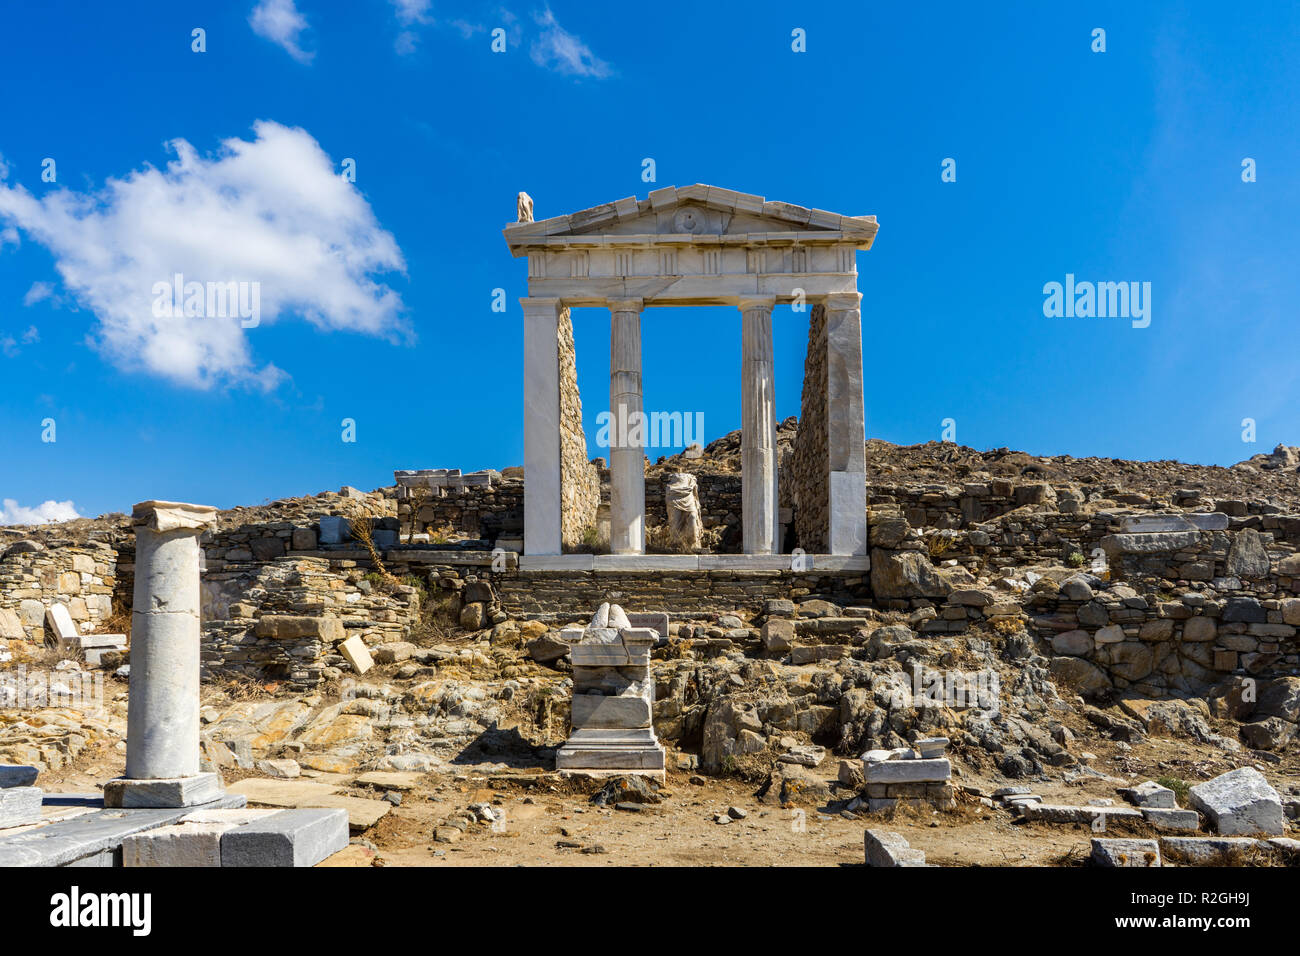 The ancient monuments and ruins on the sacred island of Delos, Greece. The birth place of god Apollo. Stock Photo